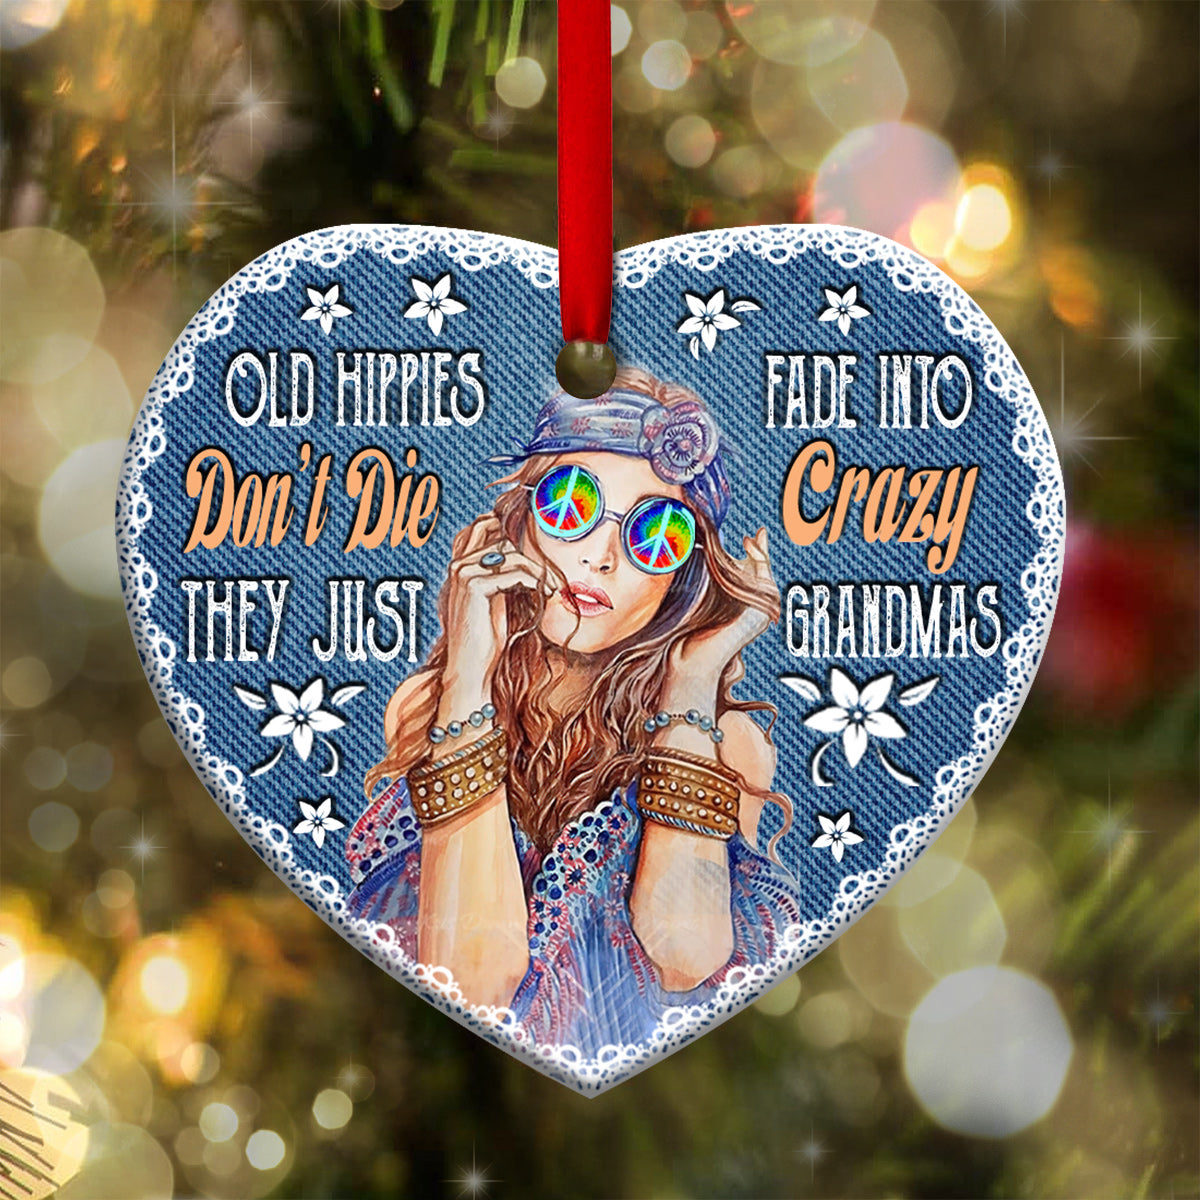 Hippie Old Hippies Dont Die They Just Fade Into Crazy Grandmas - Heart Ornament - Owl Ohh - Owl Ohh